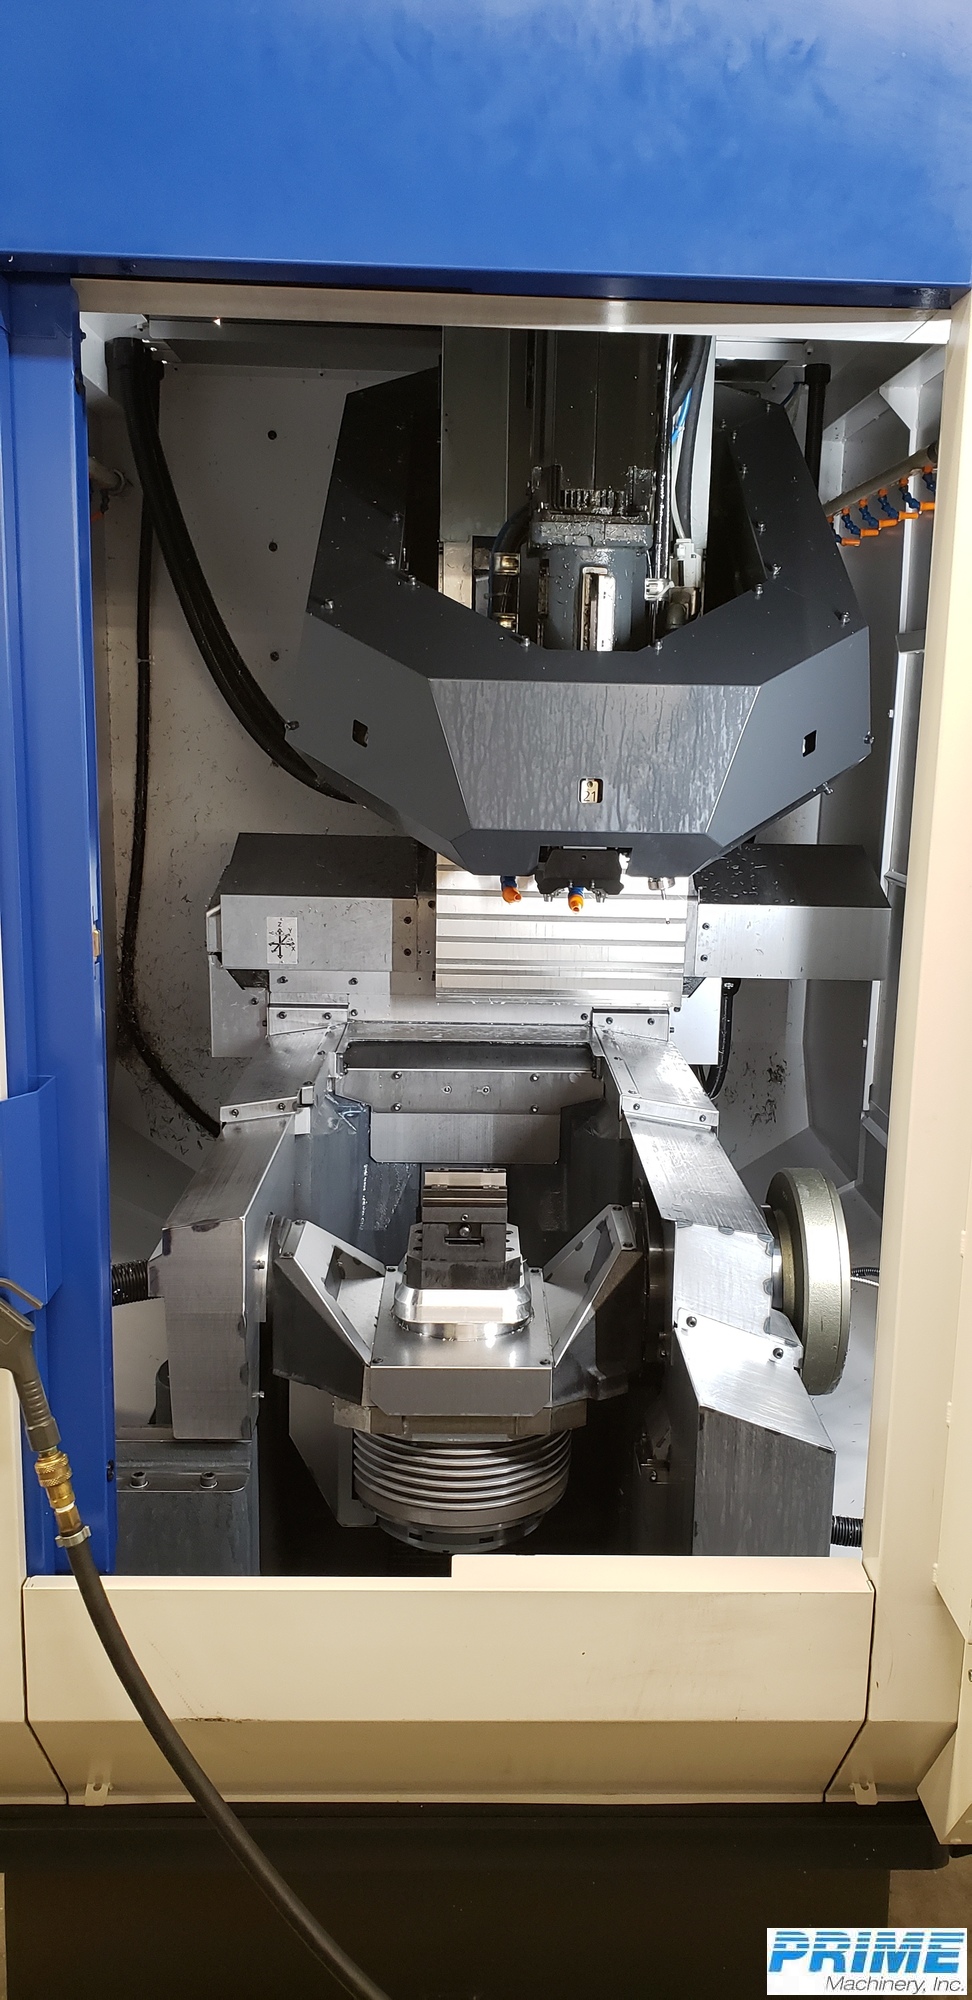 2020 BROTHER Speedio M300 X3 MACHINING CENTERS, VERICAL (5-Axis or More) | Prime Machinery